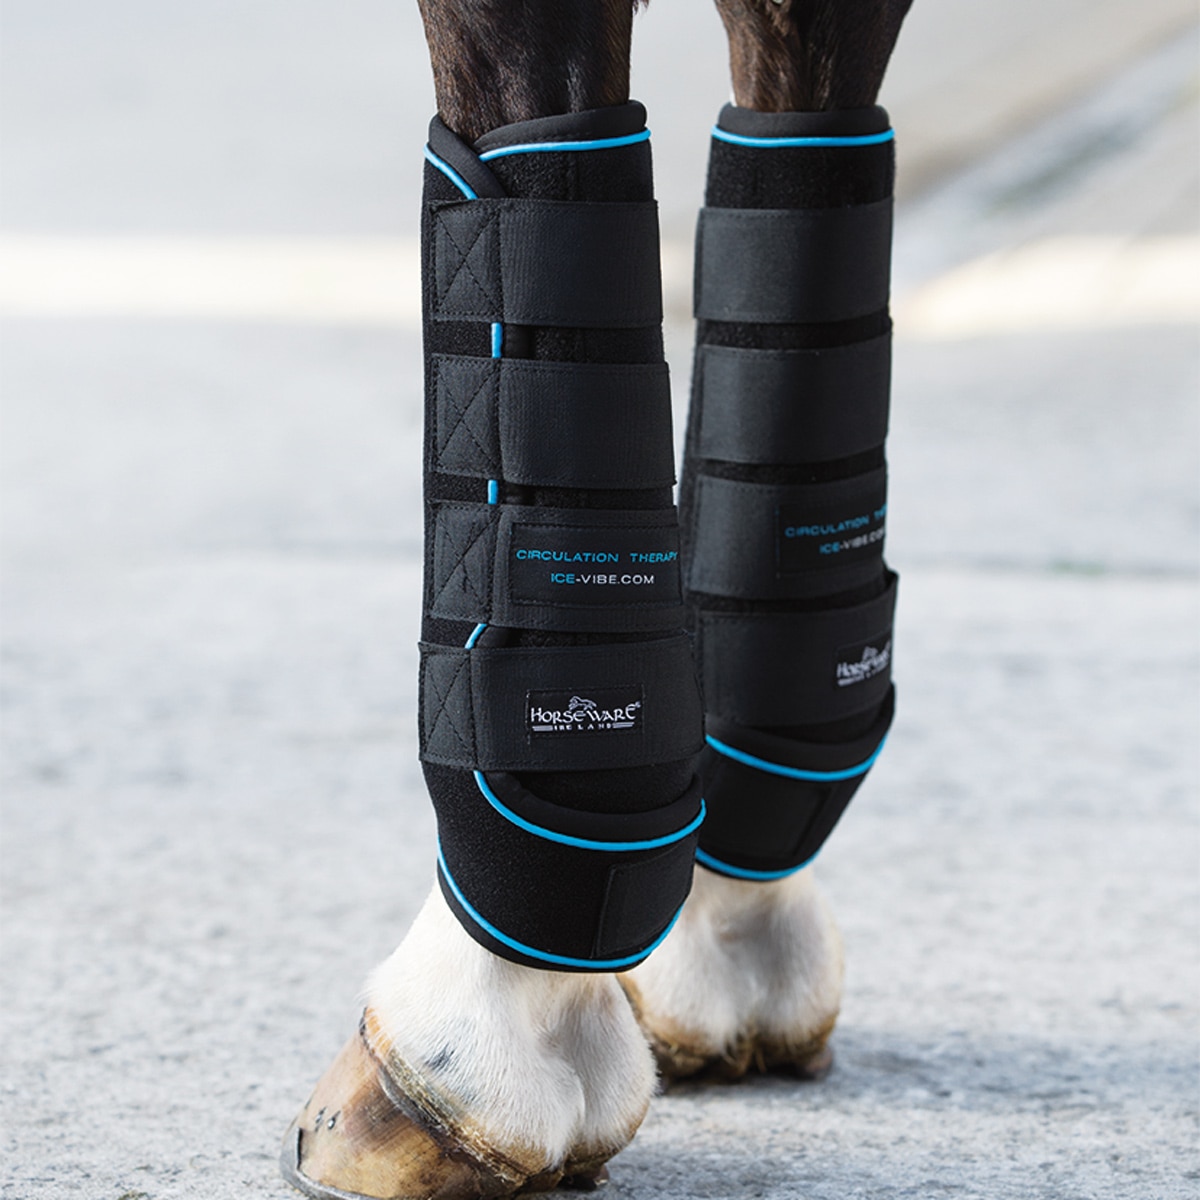 Horseware ICE VIBE KNEE BOOTS Cool Vibrating Circulation Therapy Wraps NEW STYLE